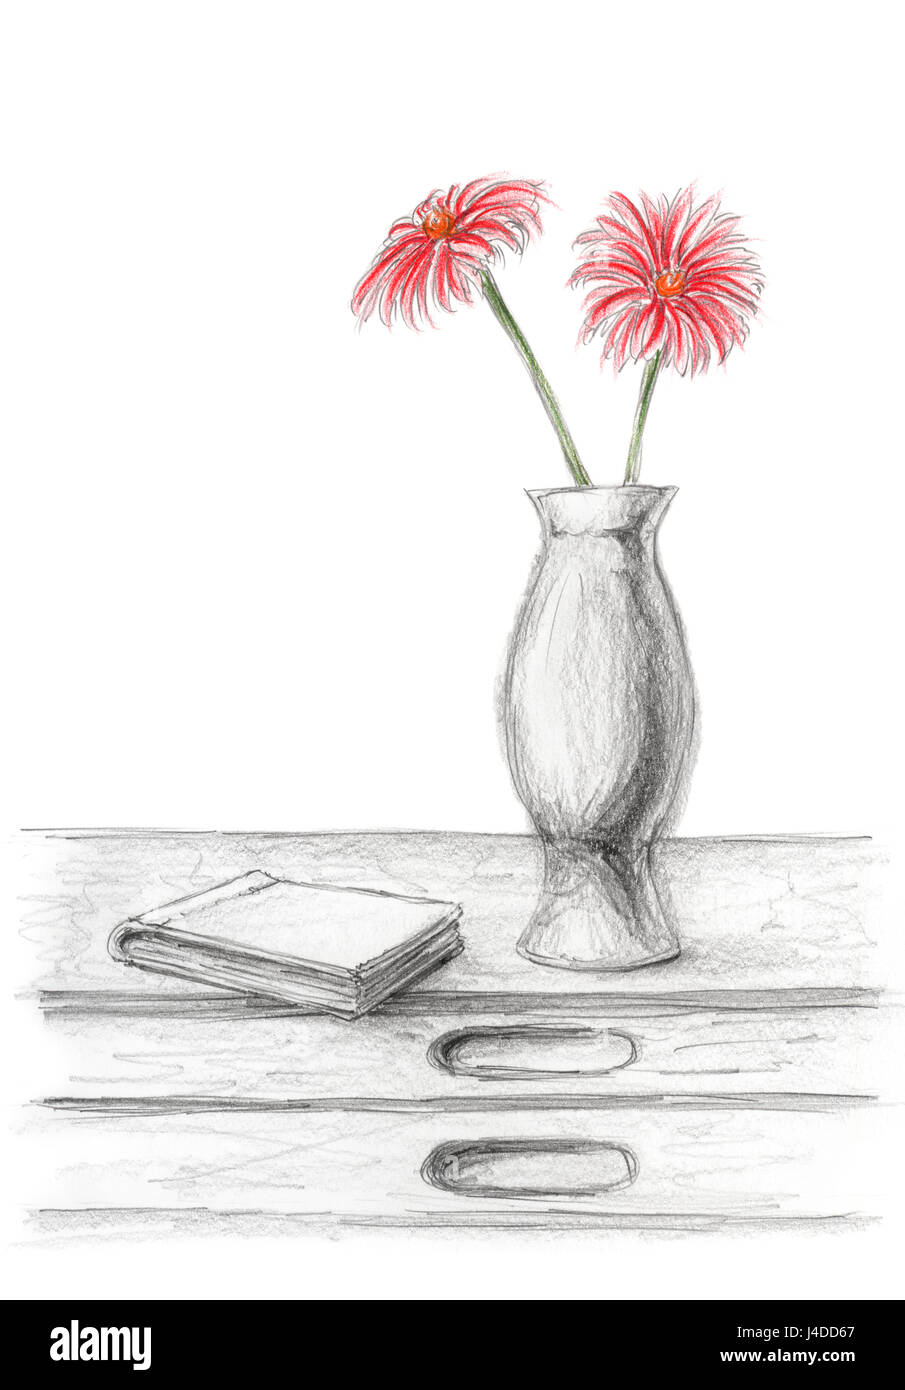 Two red flowers in a vase on desk with book. Graphite and colored ...